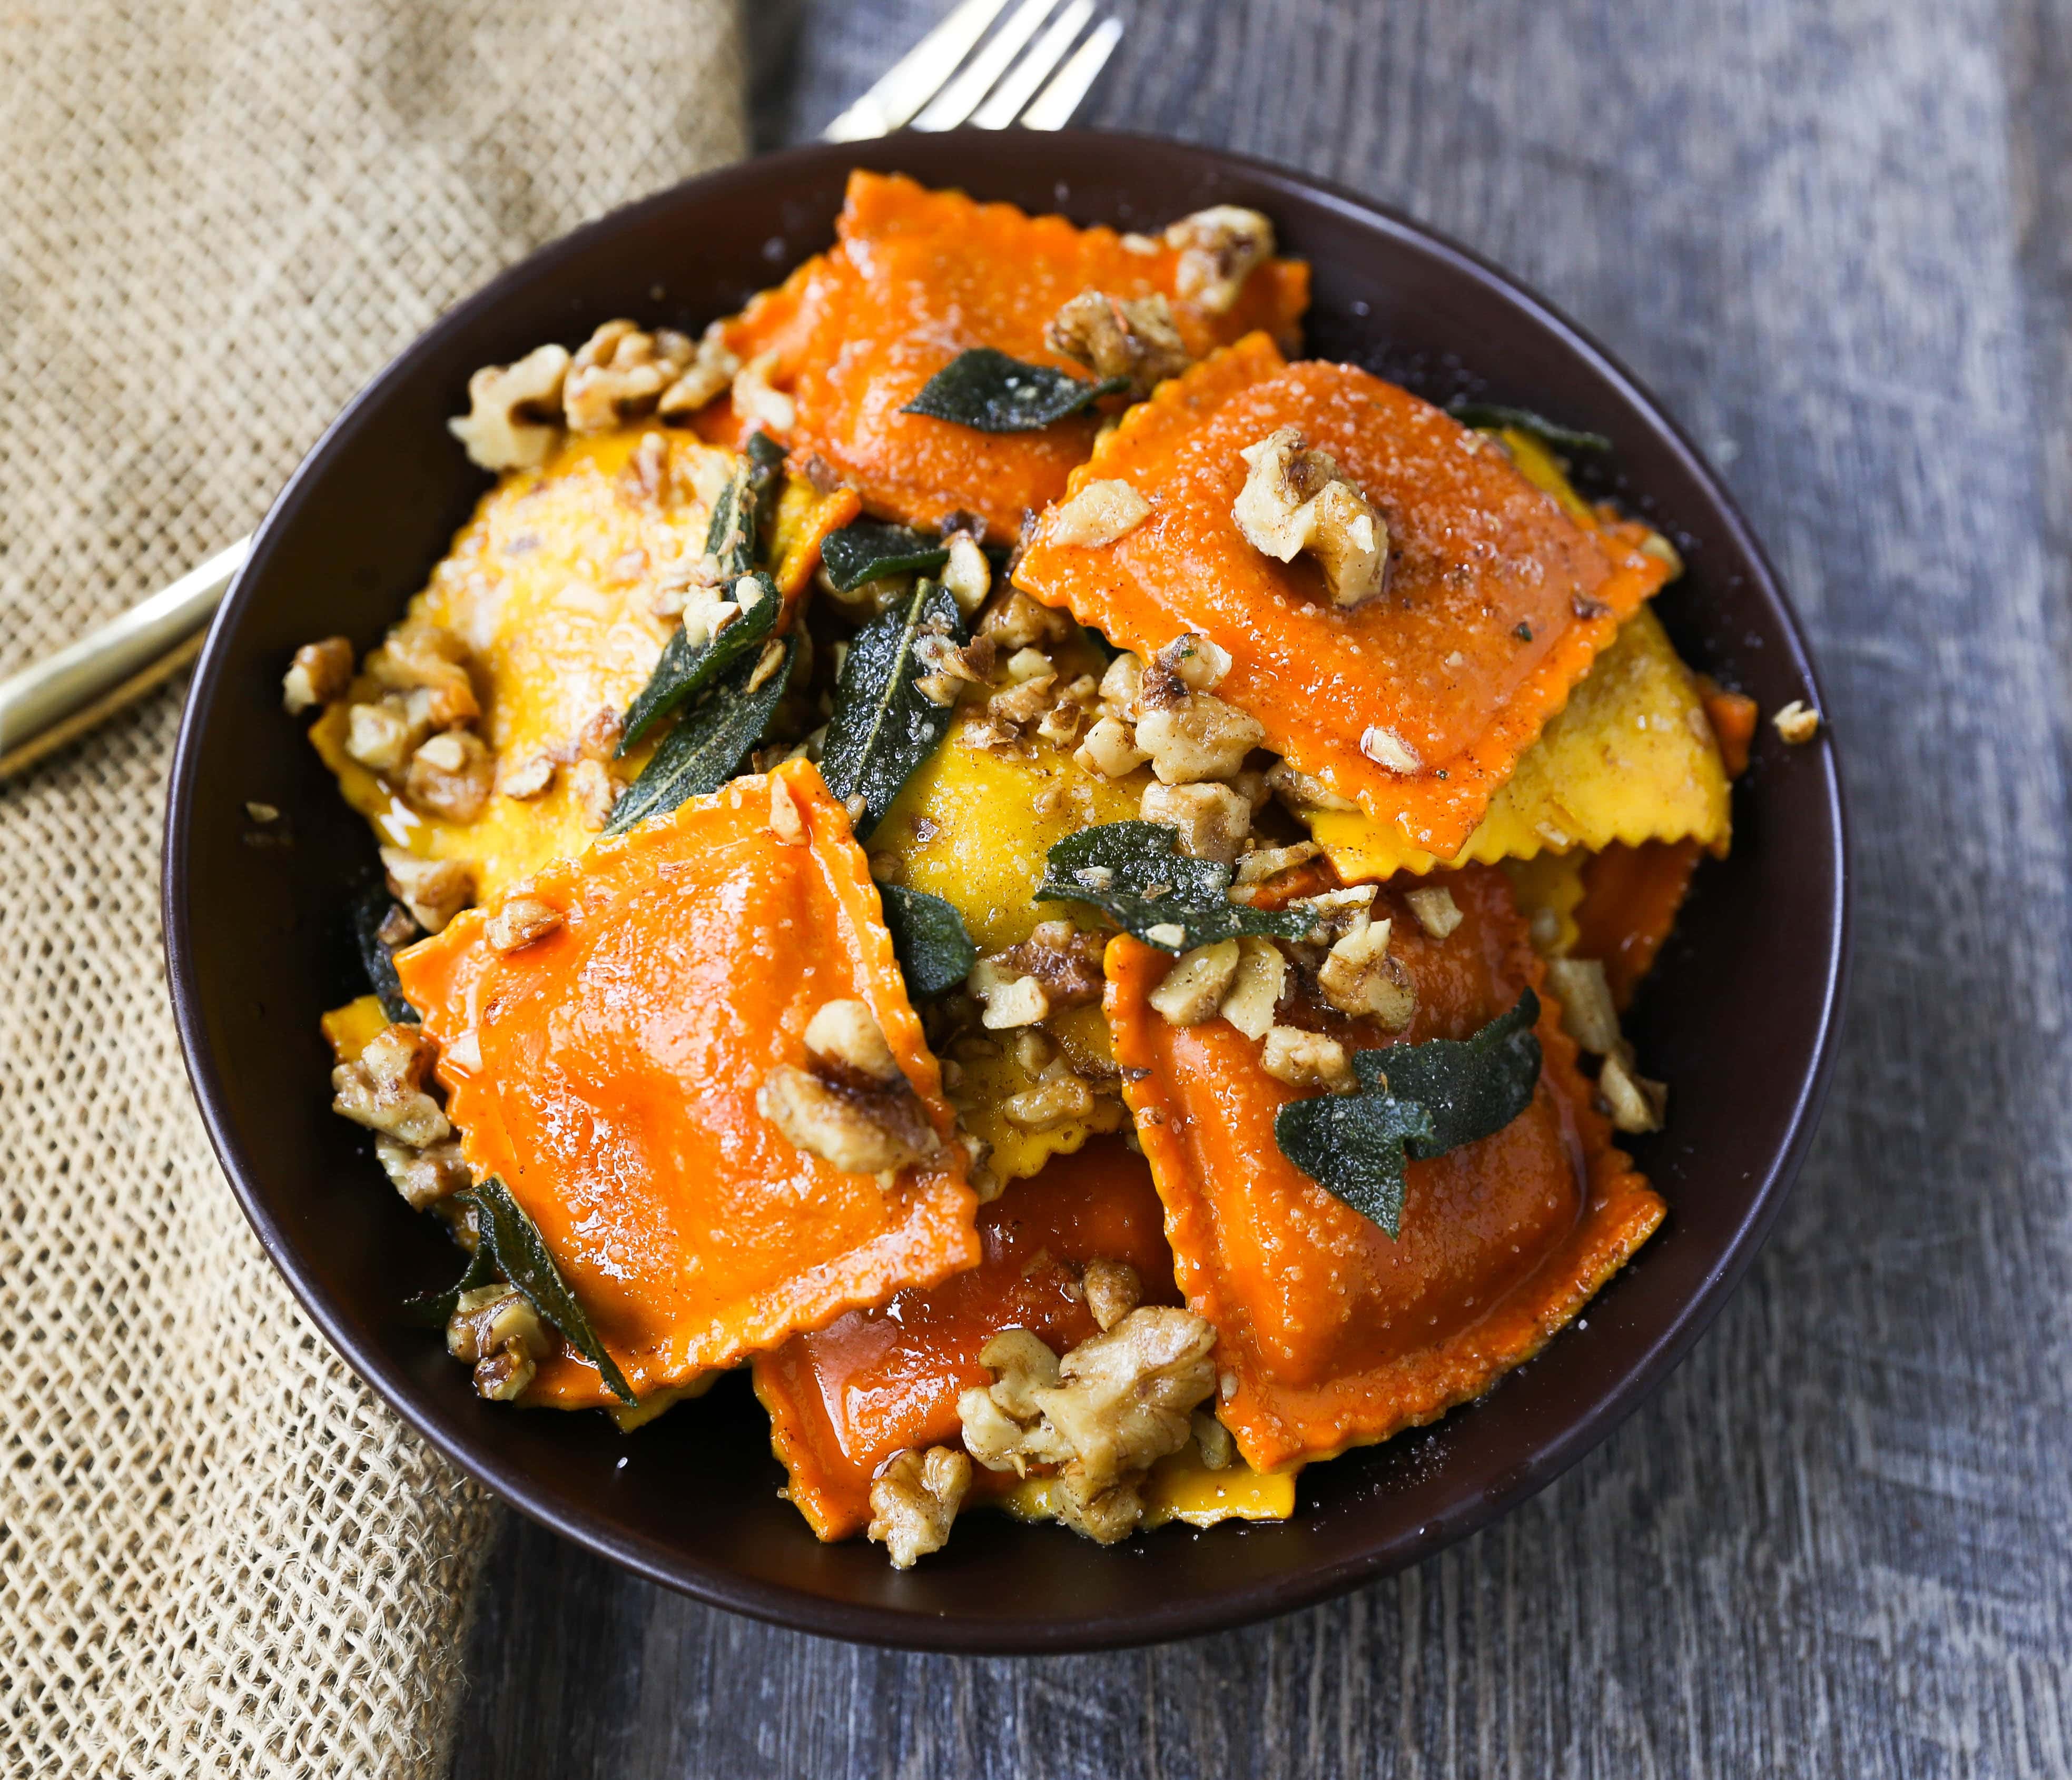 Ravioli with Browned Butter and Sage Fresh ravioli tossed in a browned butter sauce with crispy sage and toasted walnuts. A bowl of rich, creamy comfort food! www.modernhoney.com #ravioli #pasta #pumpkinravioli